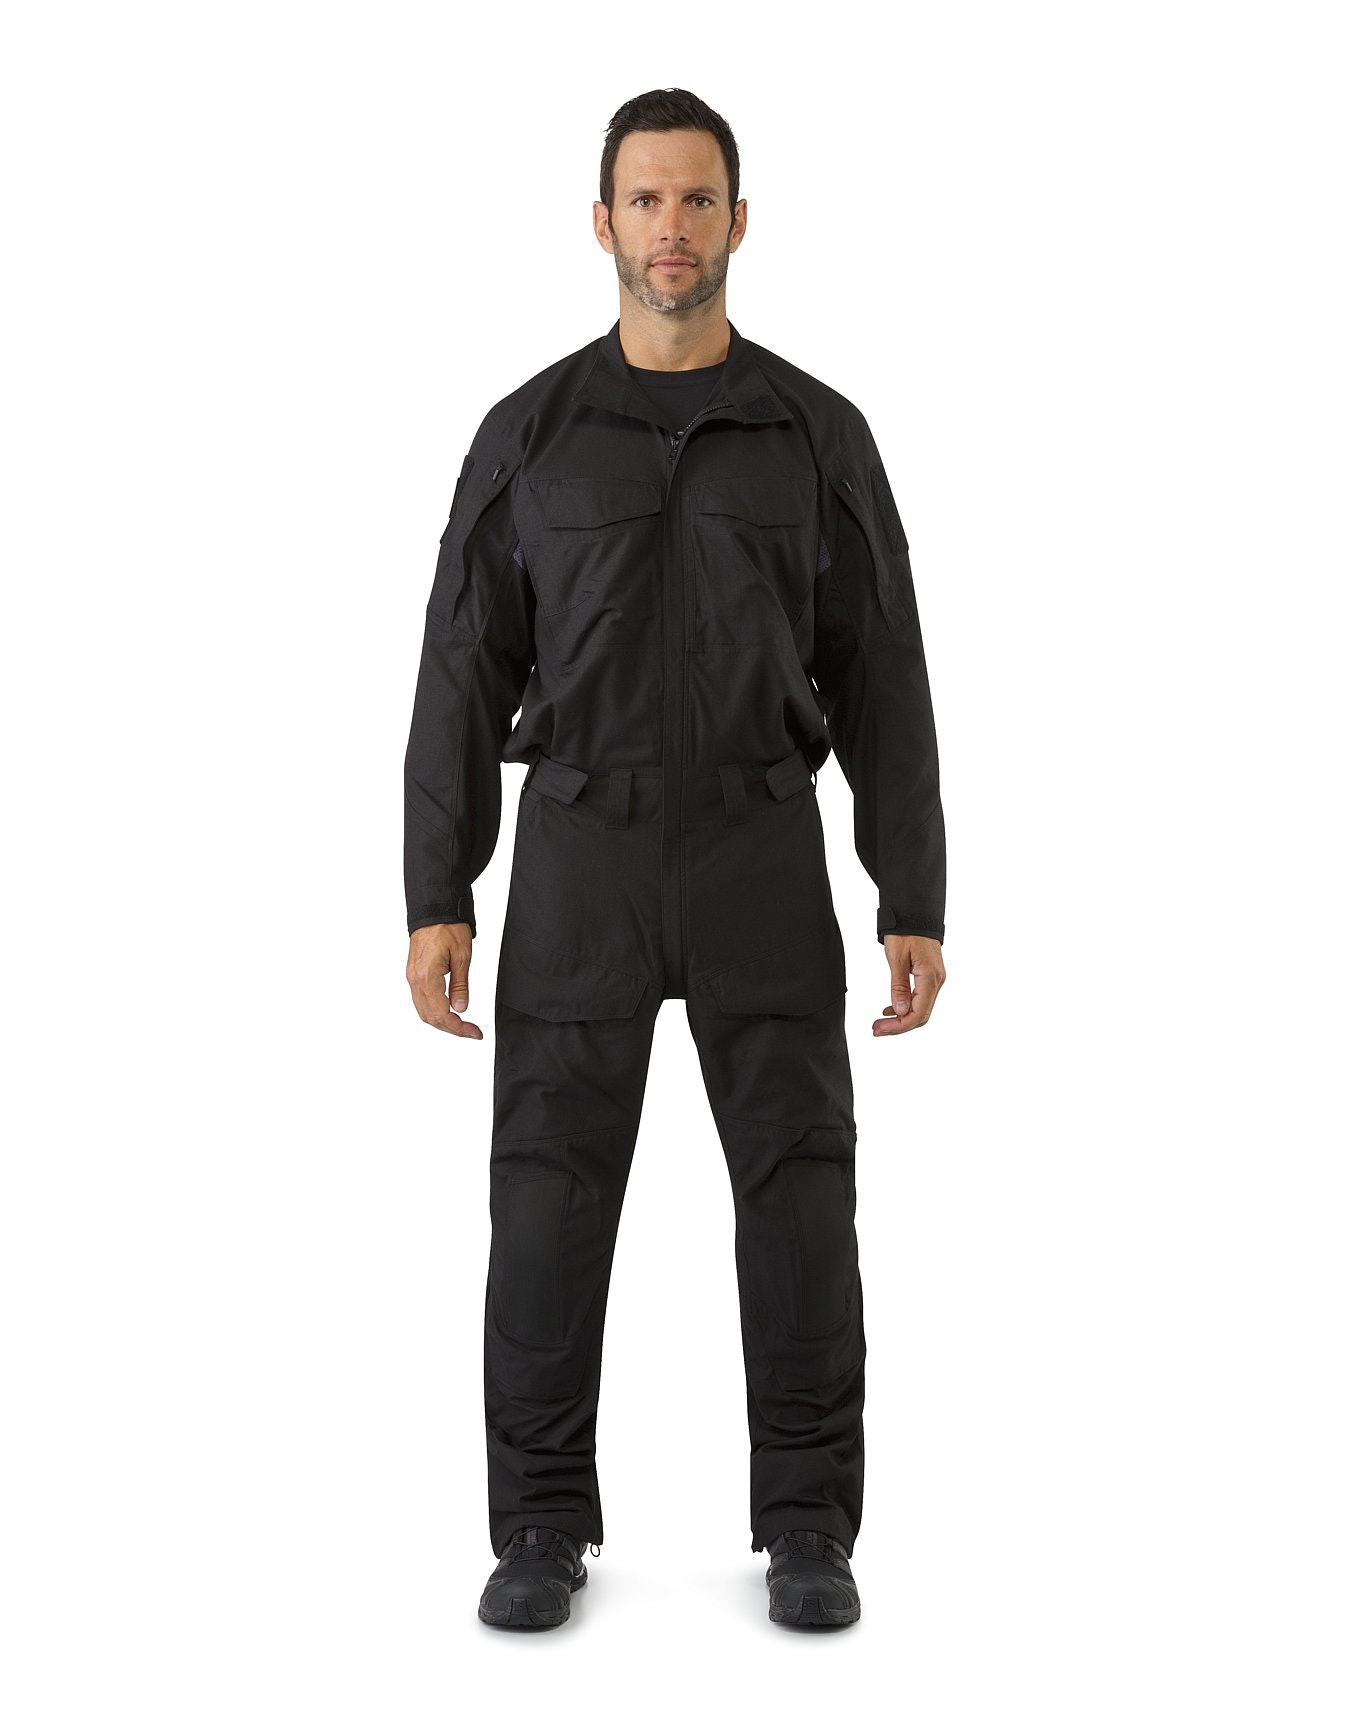 Assault-Coverall-AR-Black-Front-View | HISS